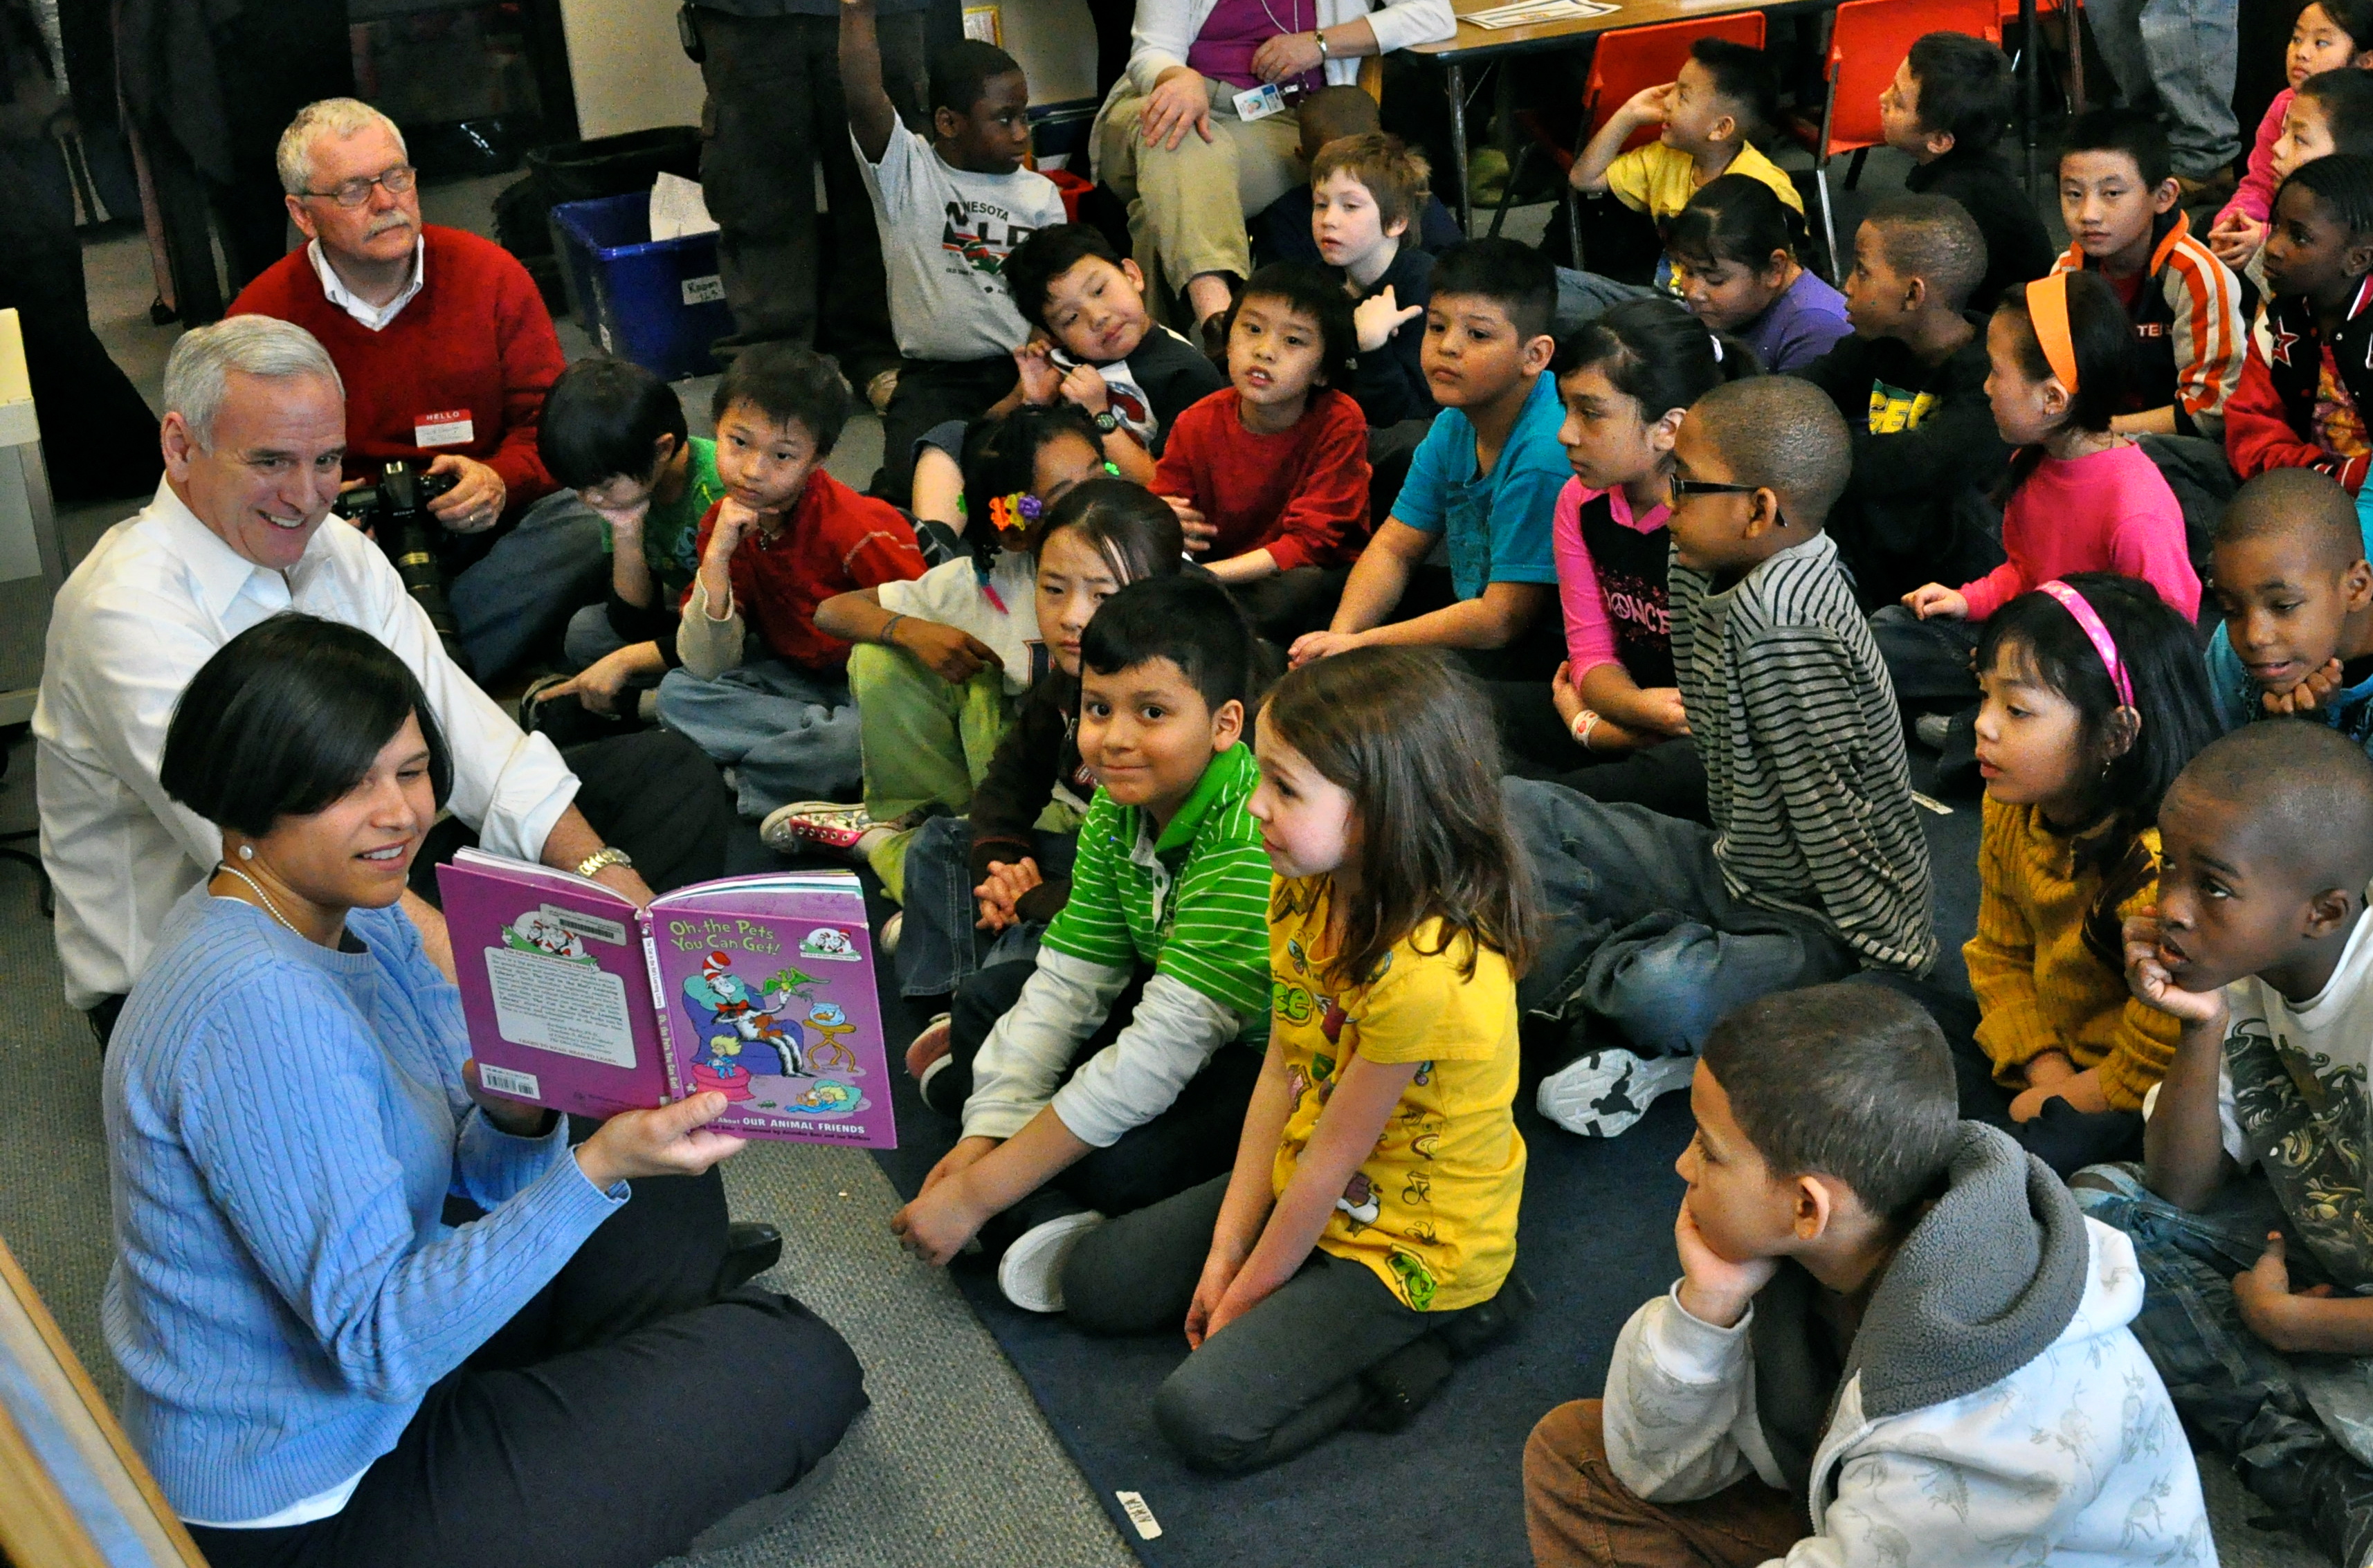 Governor of Minnesota observing the read across America day with the children